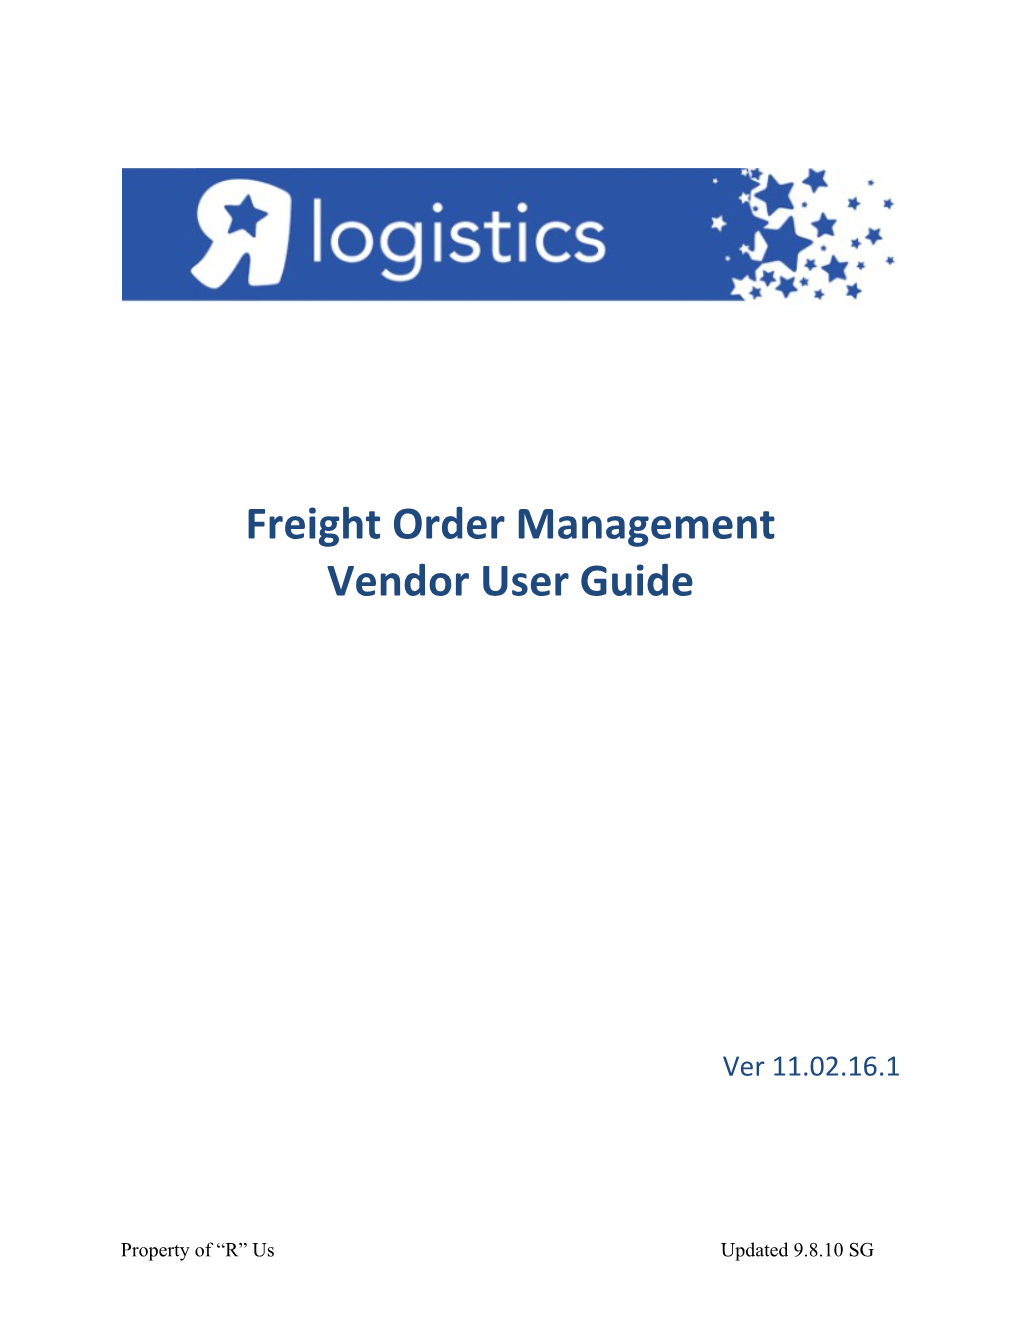 Freight Order Management System